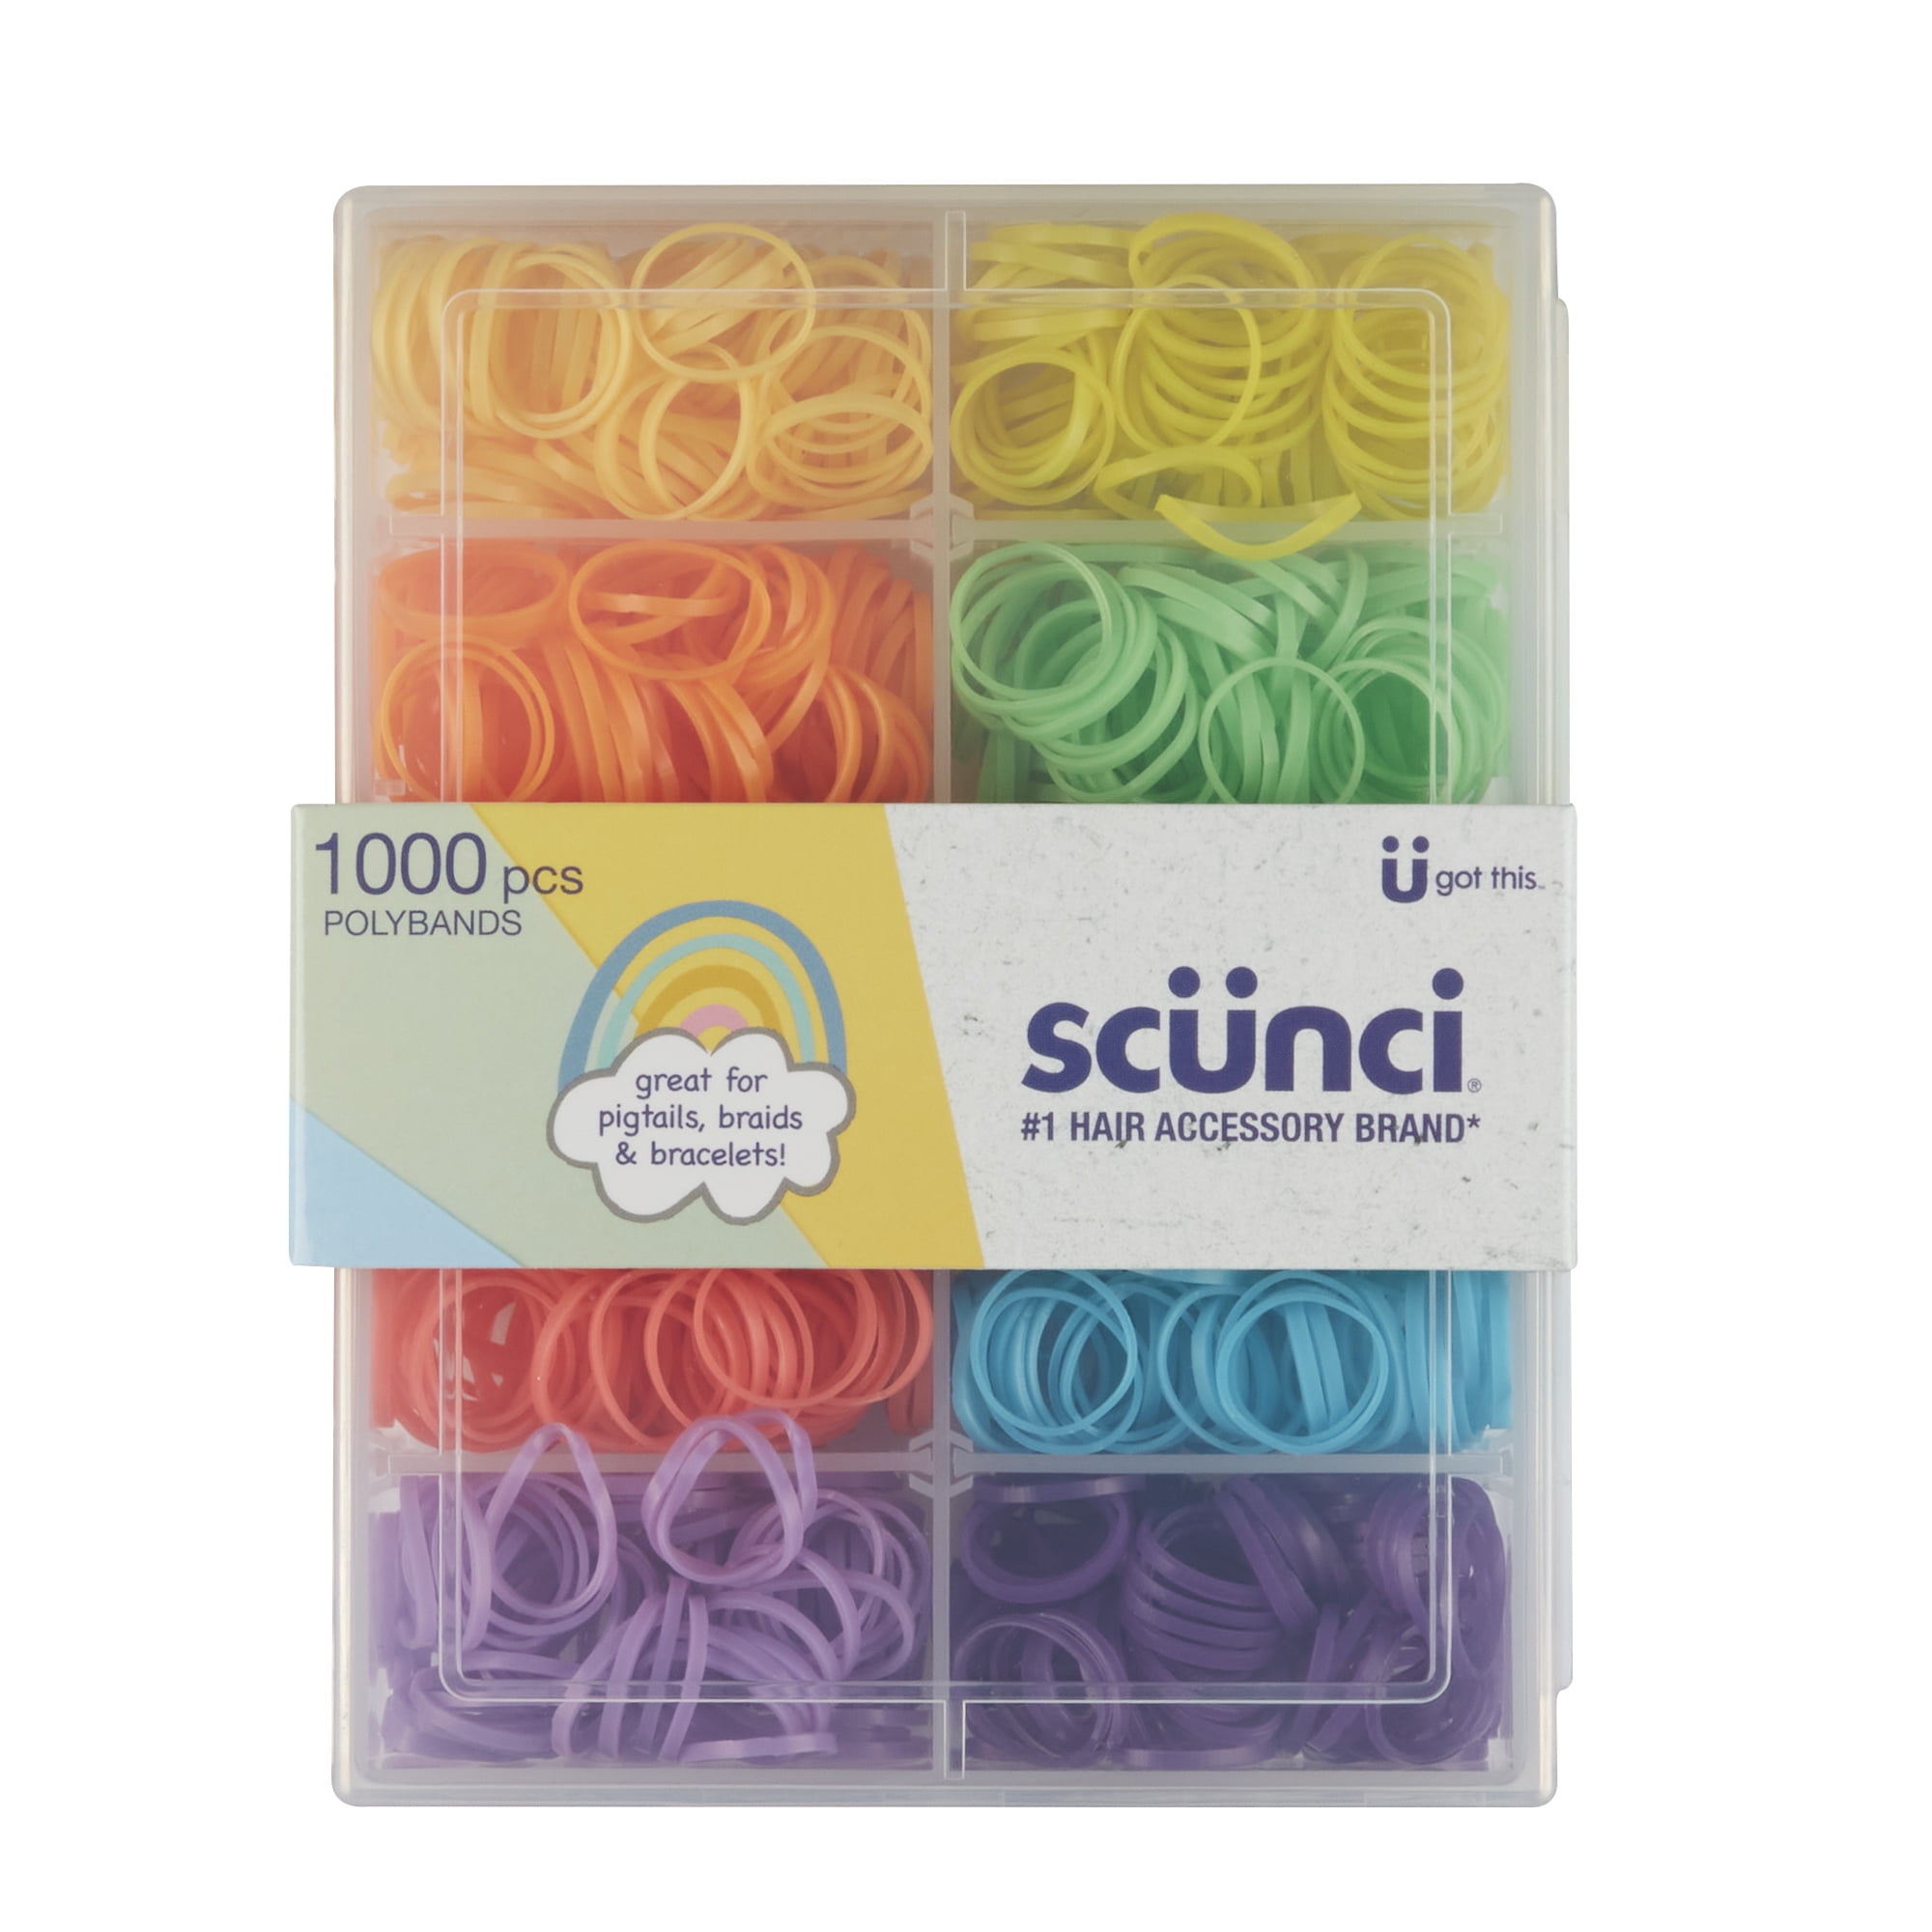 Scunci No Damage Mini Poly-band Ponytail Holder Hair Ties with Case, Assorted Bright Colors, 1000 Ct